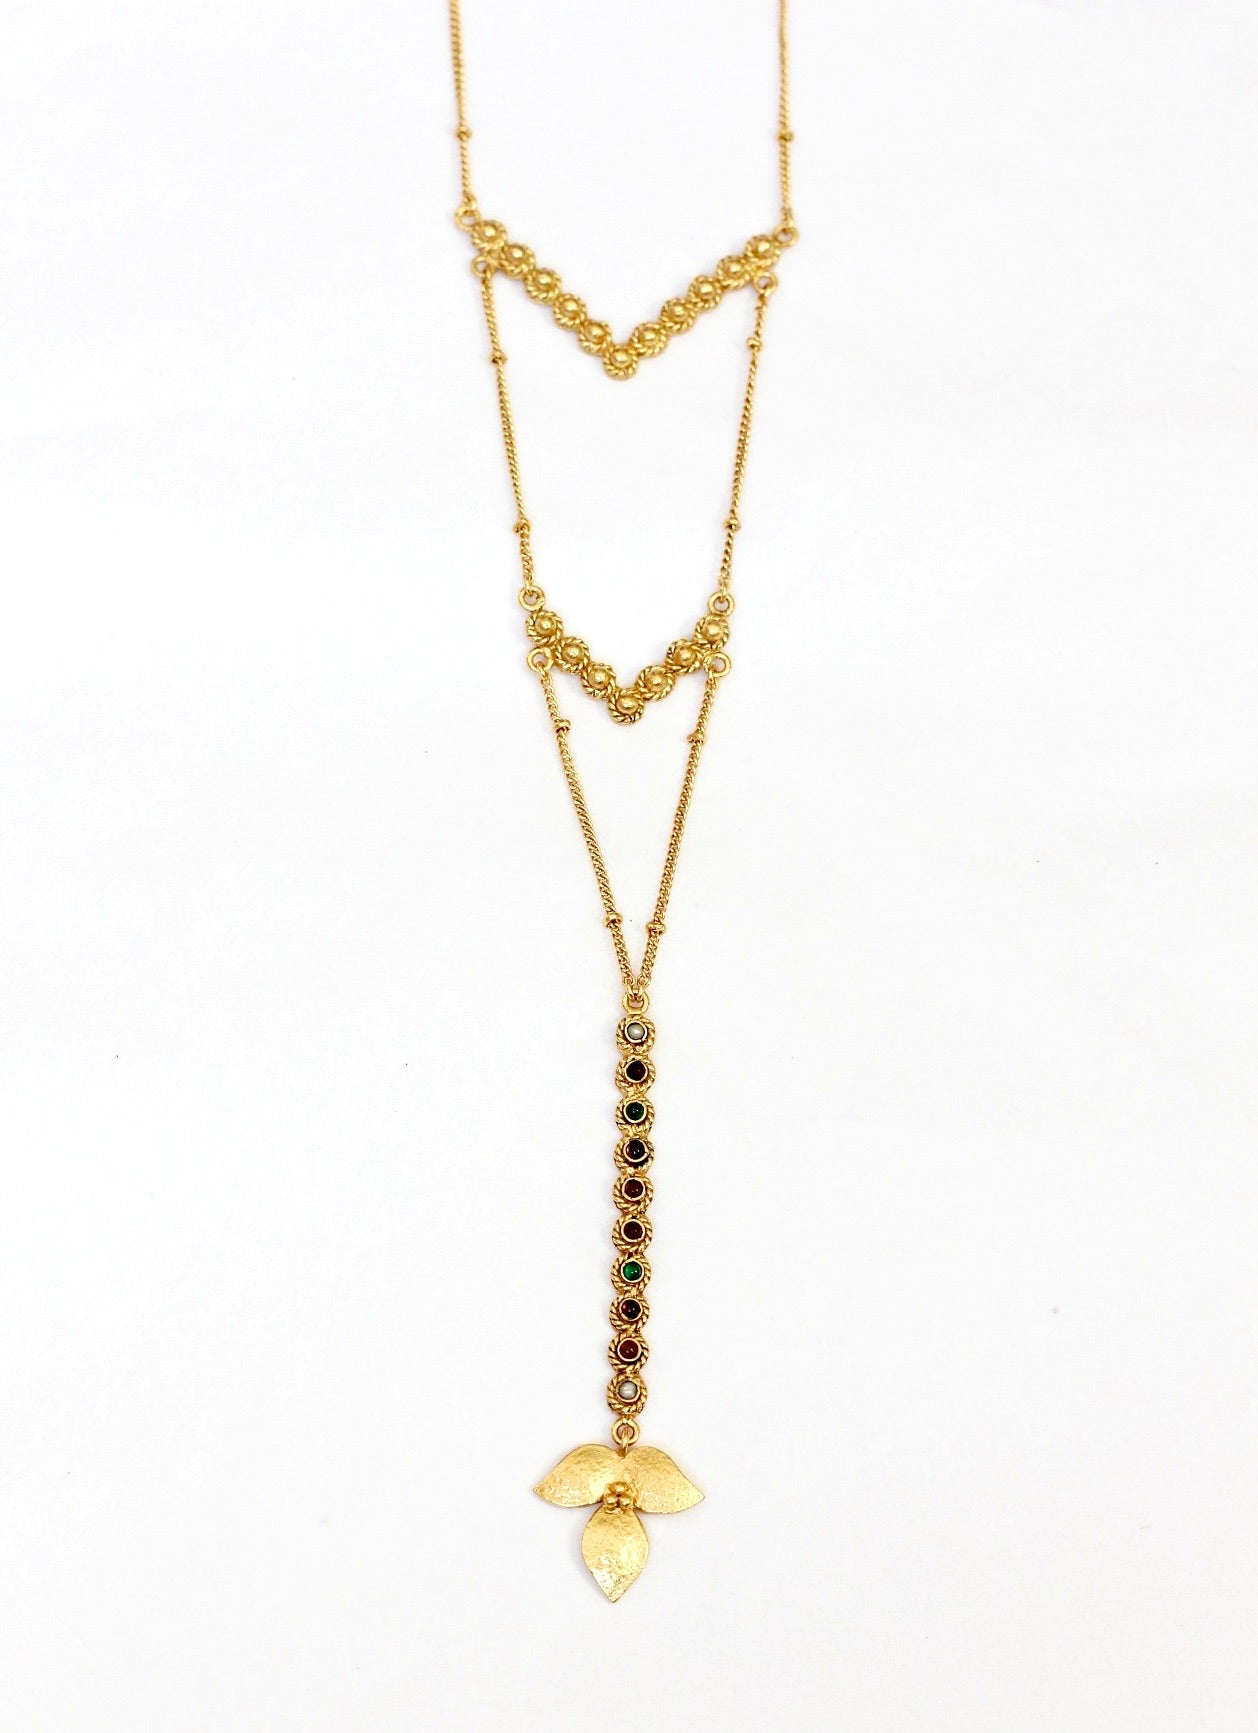 DIONISIO MULTI STONE LONG NECKLACE